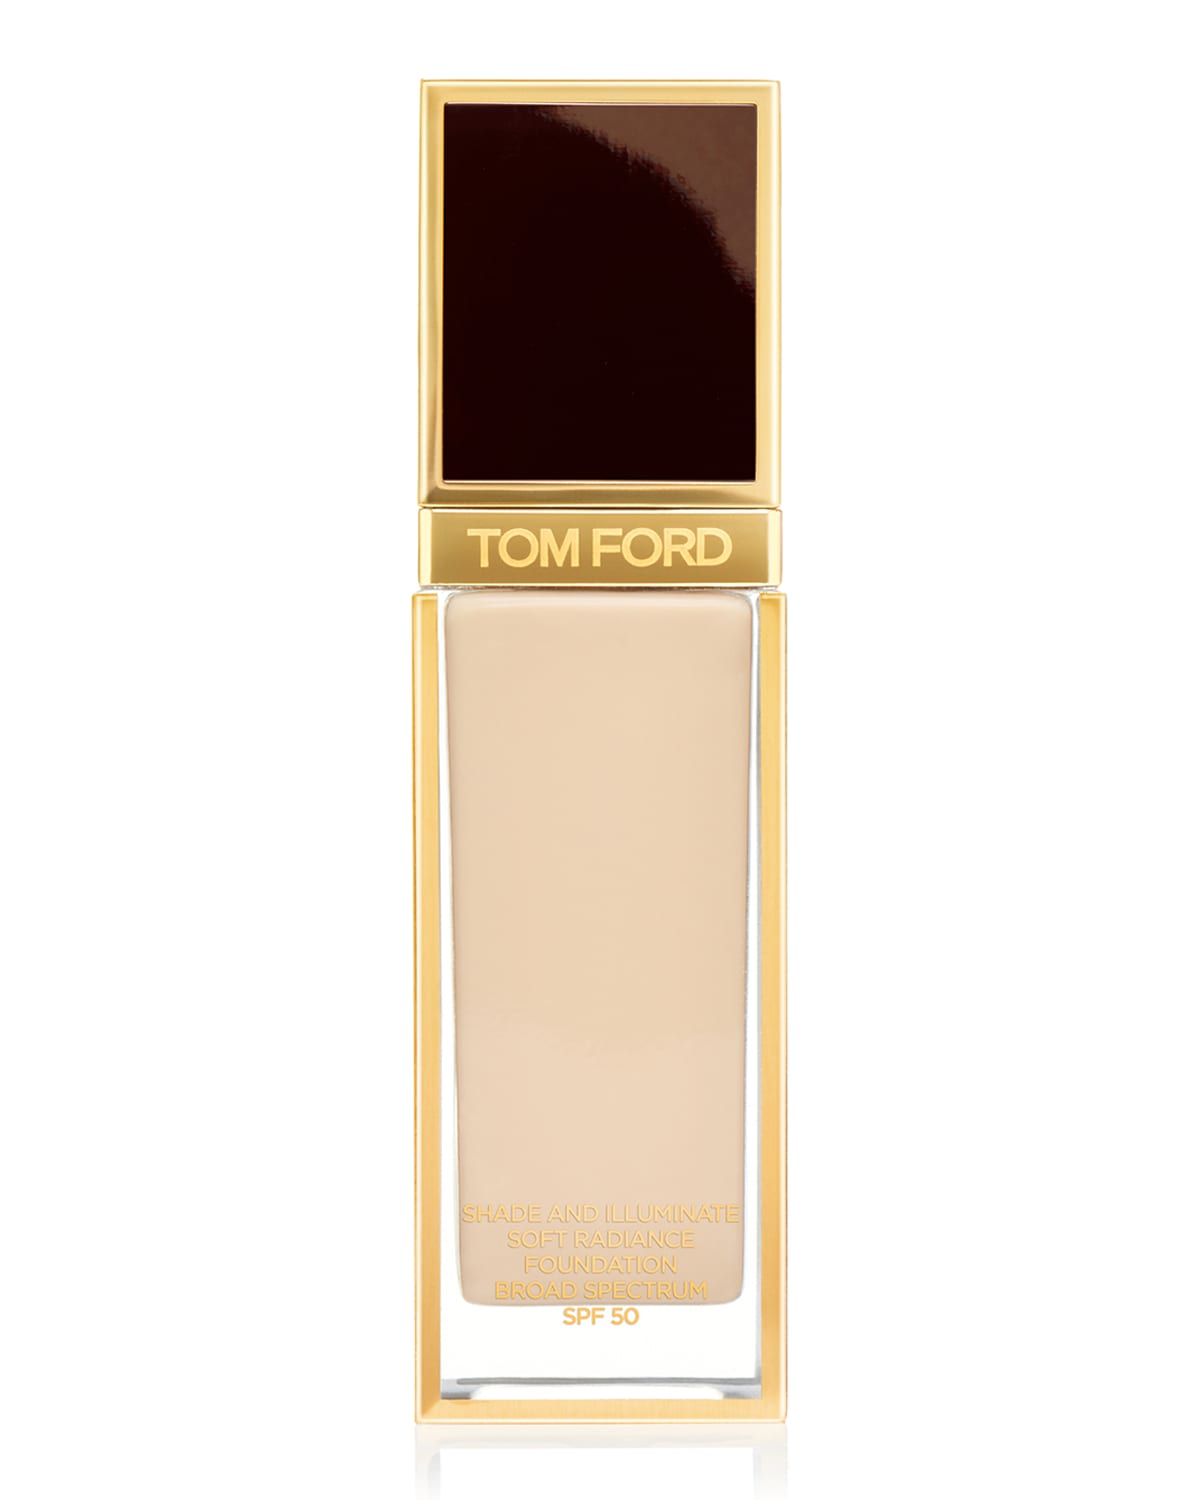 Shop Tom Ford 1 Oz. Shade And Illuminate Soft Radiance Foundation Spf 50 In 1.3 Nude Ivory